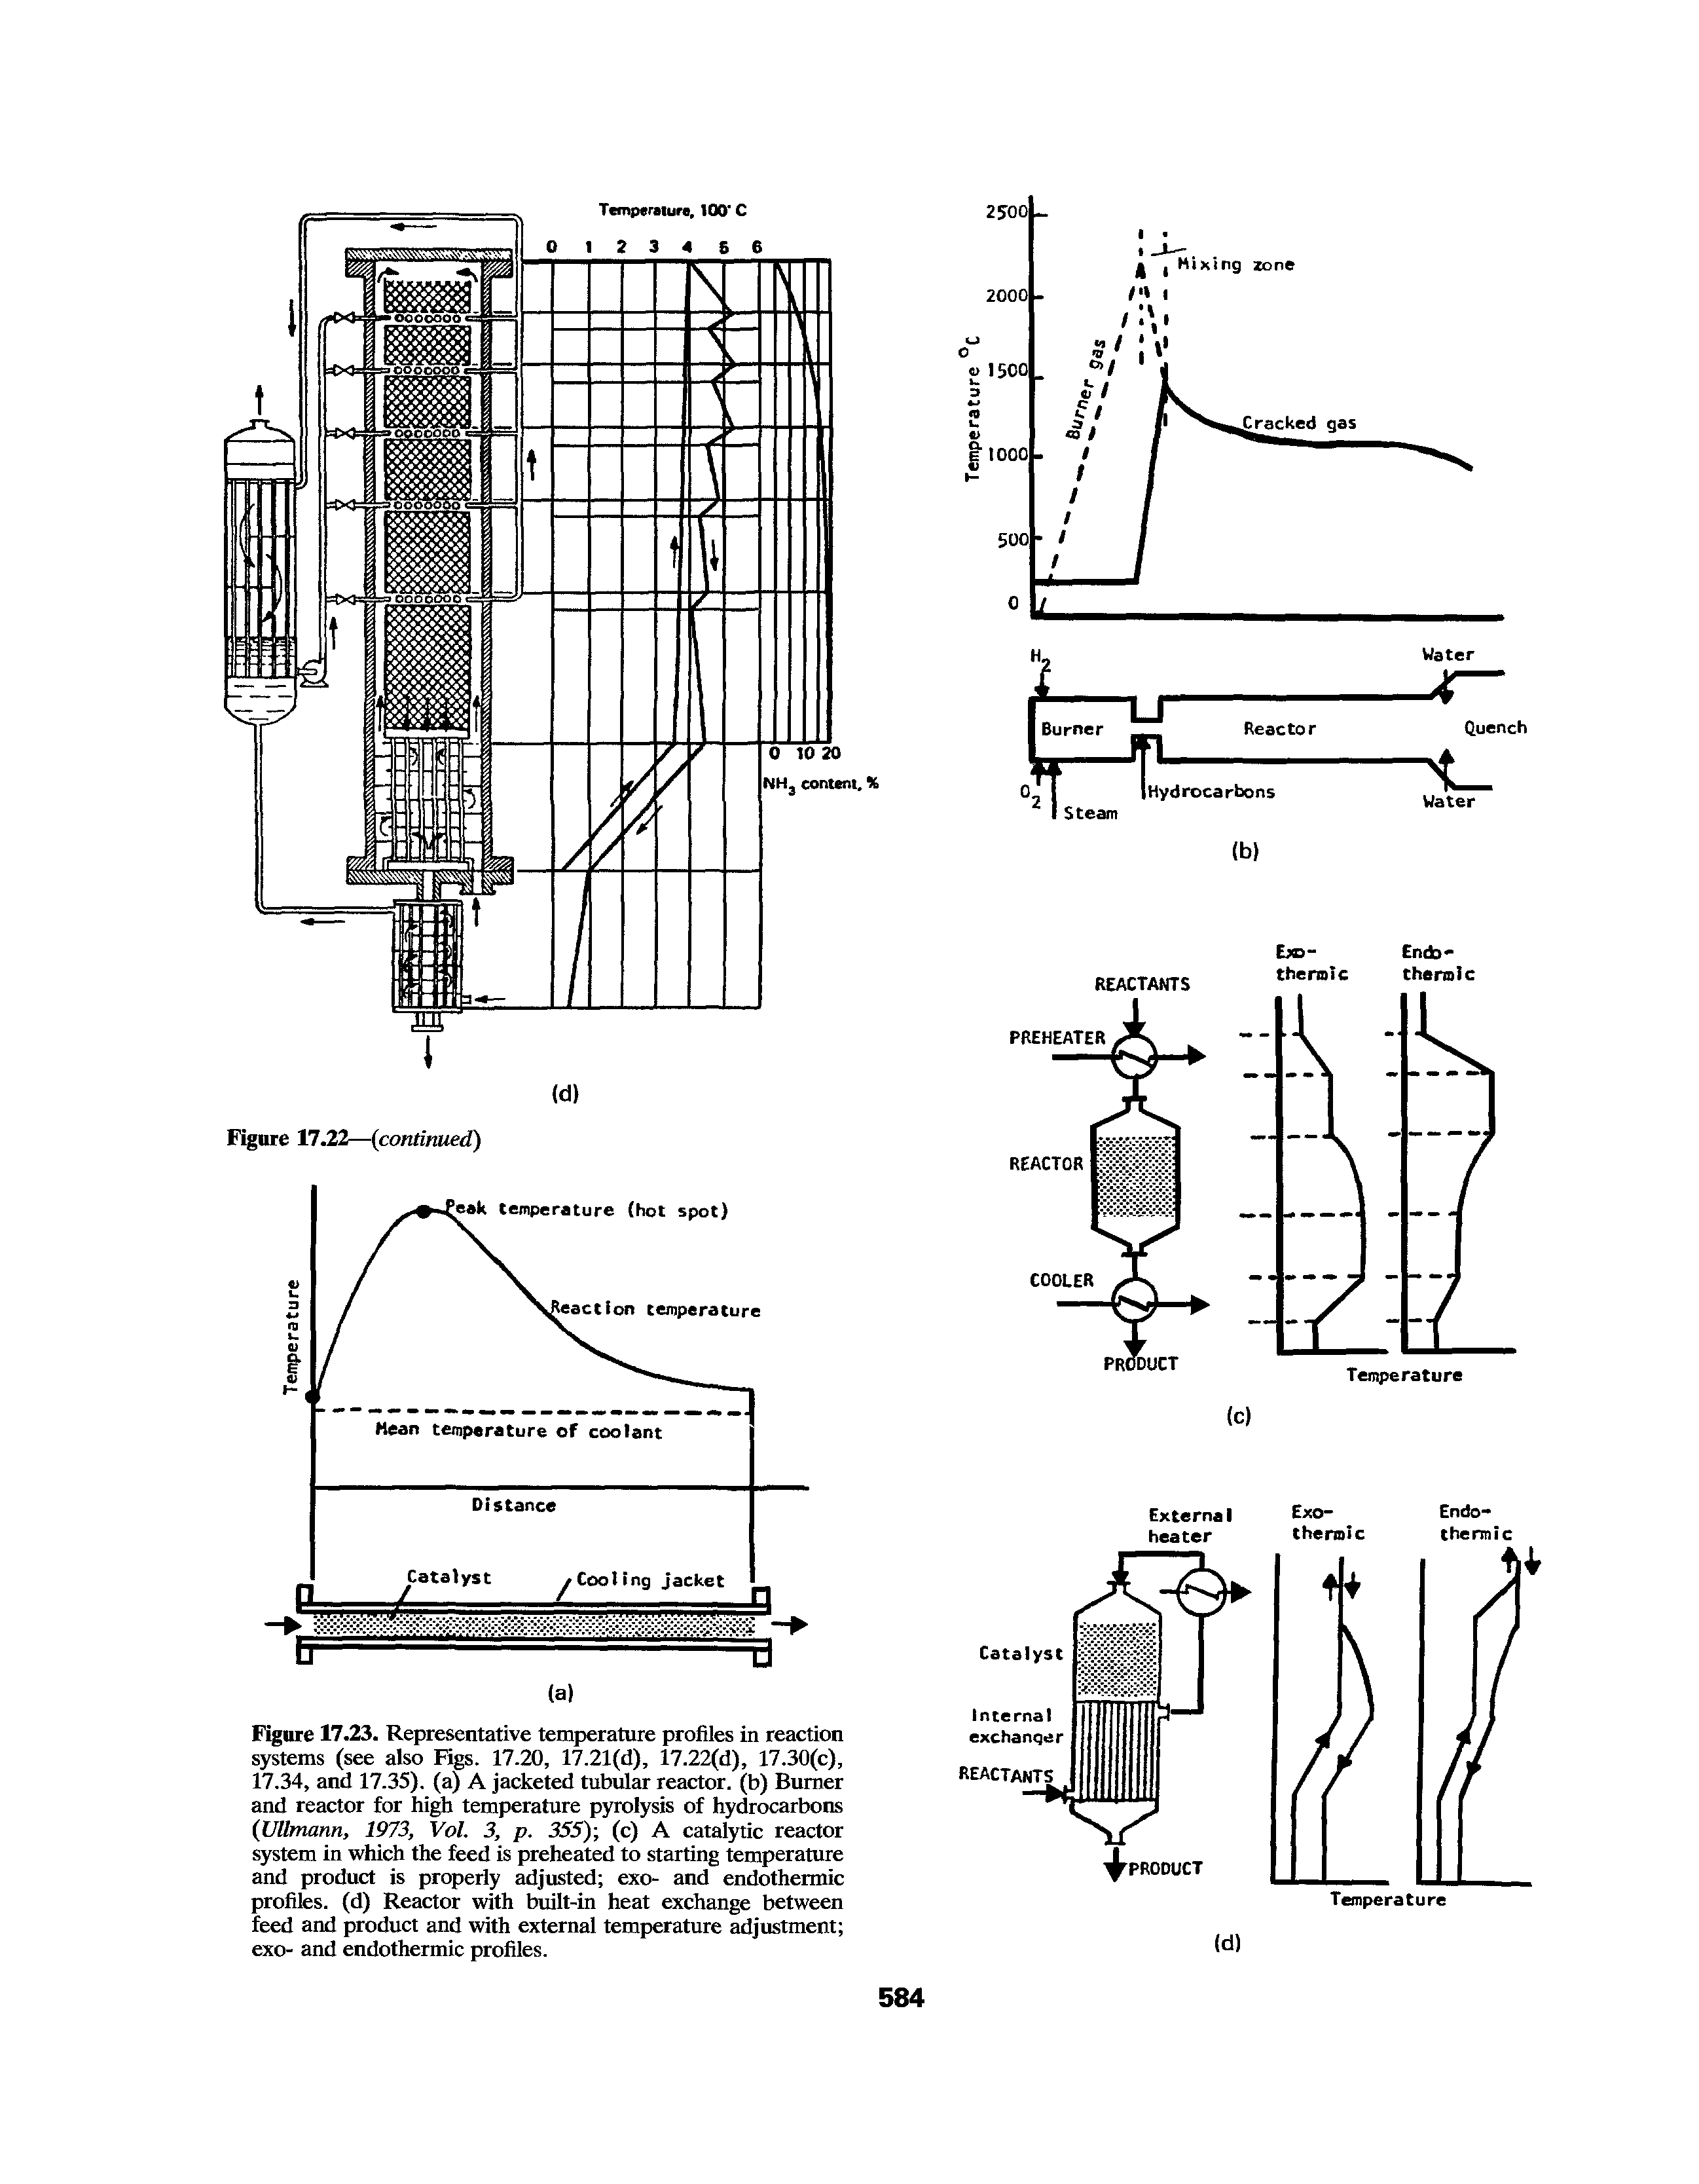 Figure 17.23. Representative temperature profiles in reaction systems (see also Figs. 17.20, 17.21(d), 17.22(d), 17.30(c), 17.34, and 17.35). (a) A jacketed tubular reactor, (b) Burner and reactor for high temperature pyrolysis of hydrocarbons (Ullmann, 1973, Vol. 3, p. 355) (c) A catalytic reactor system in which the feed is preheated to starting temperature and product is properly adjusted exo- and endothermic profiles, (d) Reactor with built-in heat exchange between feed and product and with external temperature adjustment exo- and endothermic profiles.